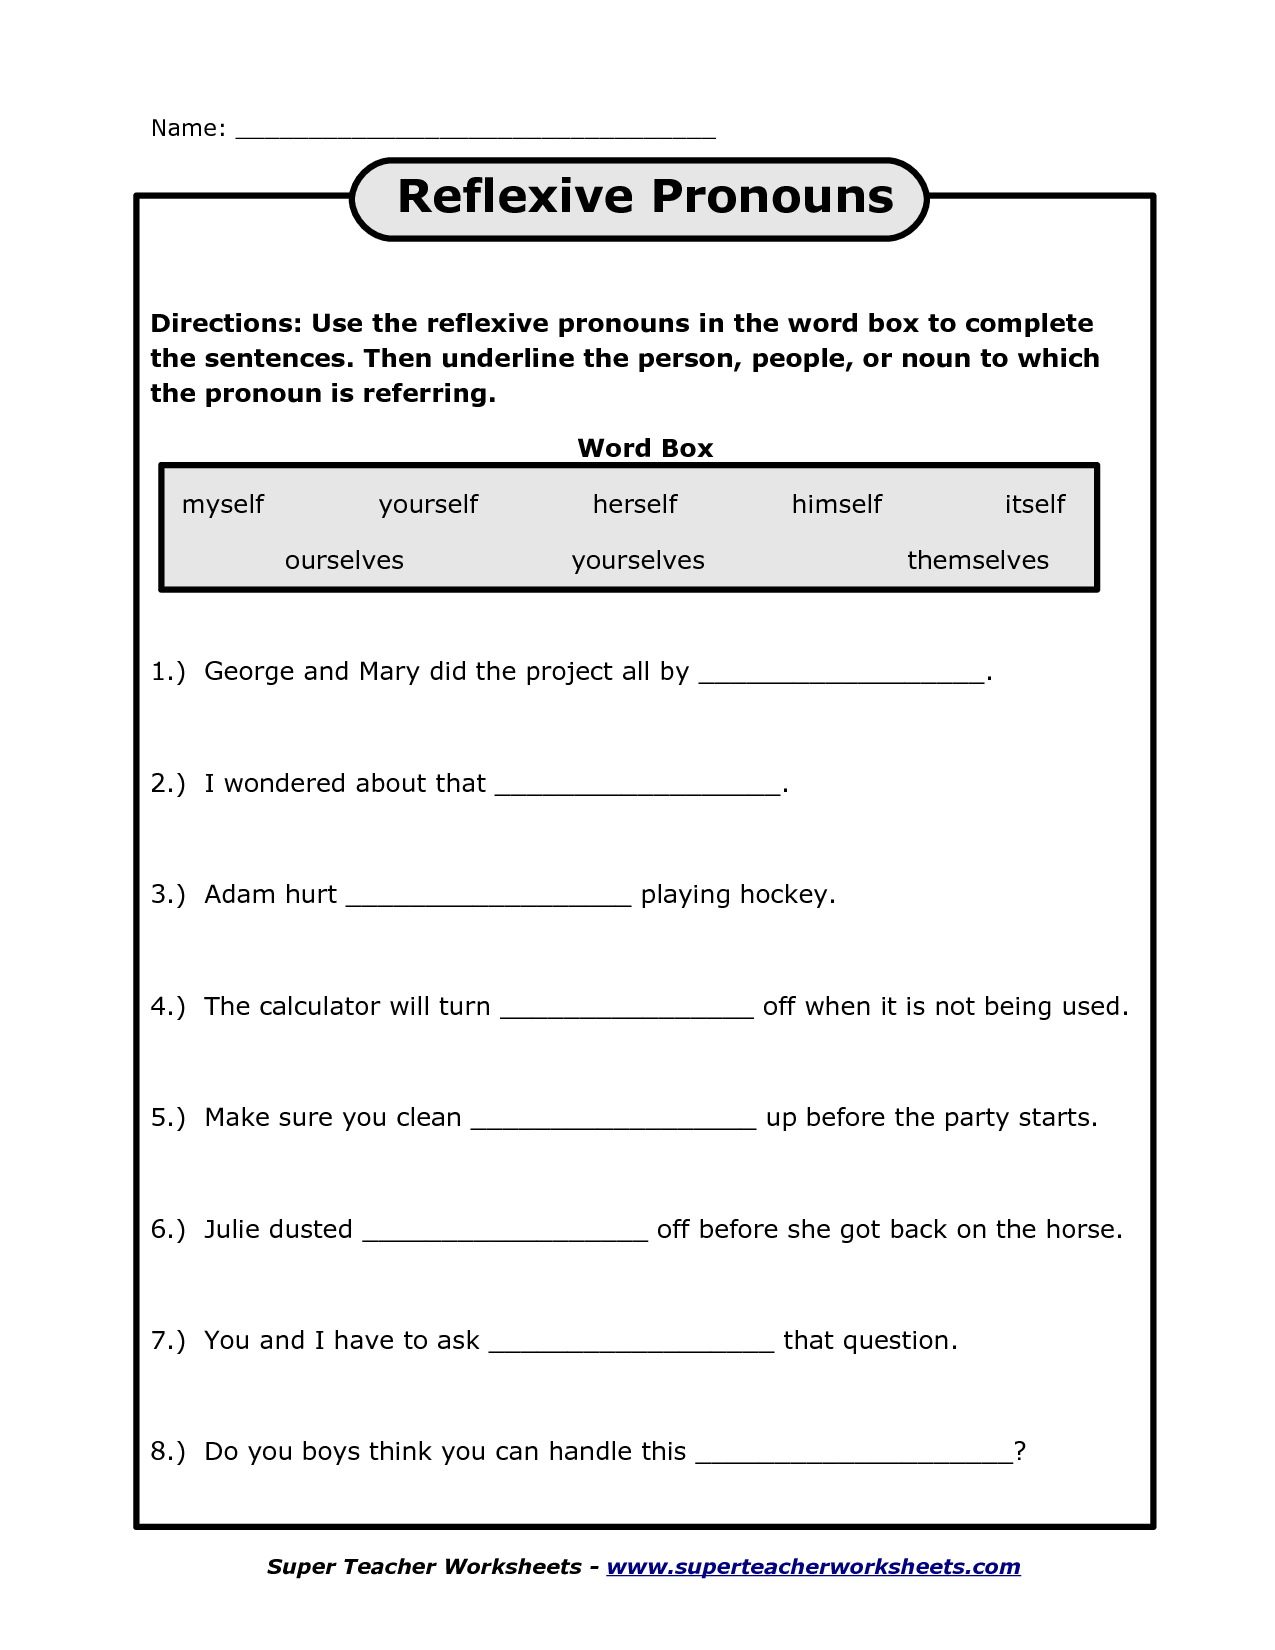 personal-pronouns-worksheets-for-grade-2-i-am-stuck-on-hairstyles-ideas-cause-hairstyles